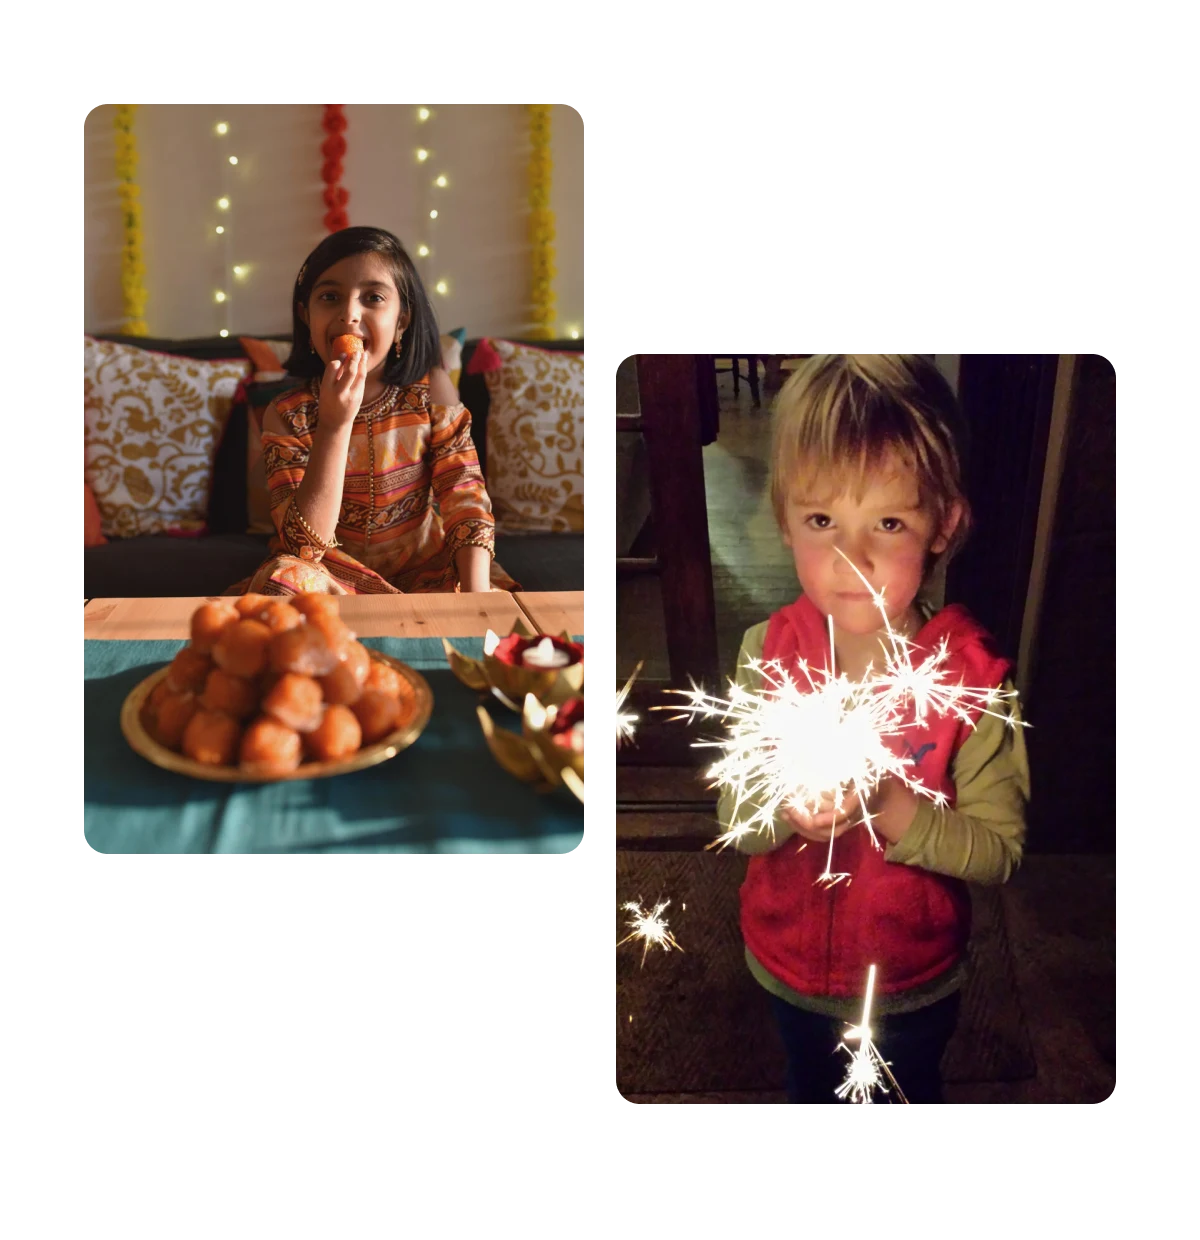 Two pins, young girl eating a doughnut, young boy holding sparklers